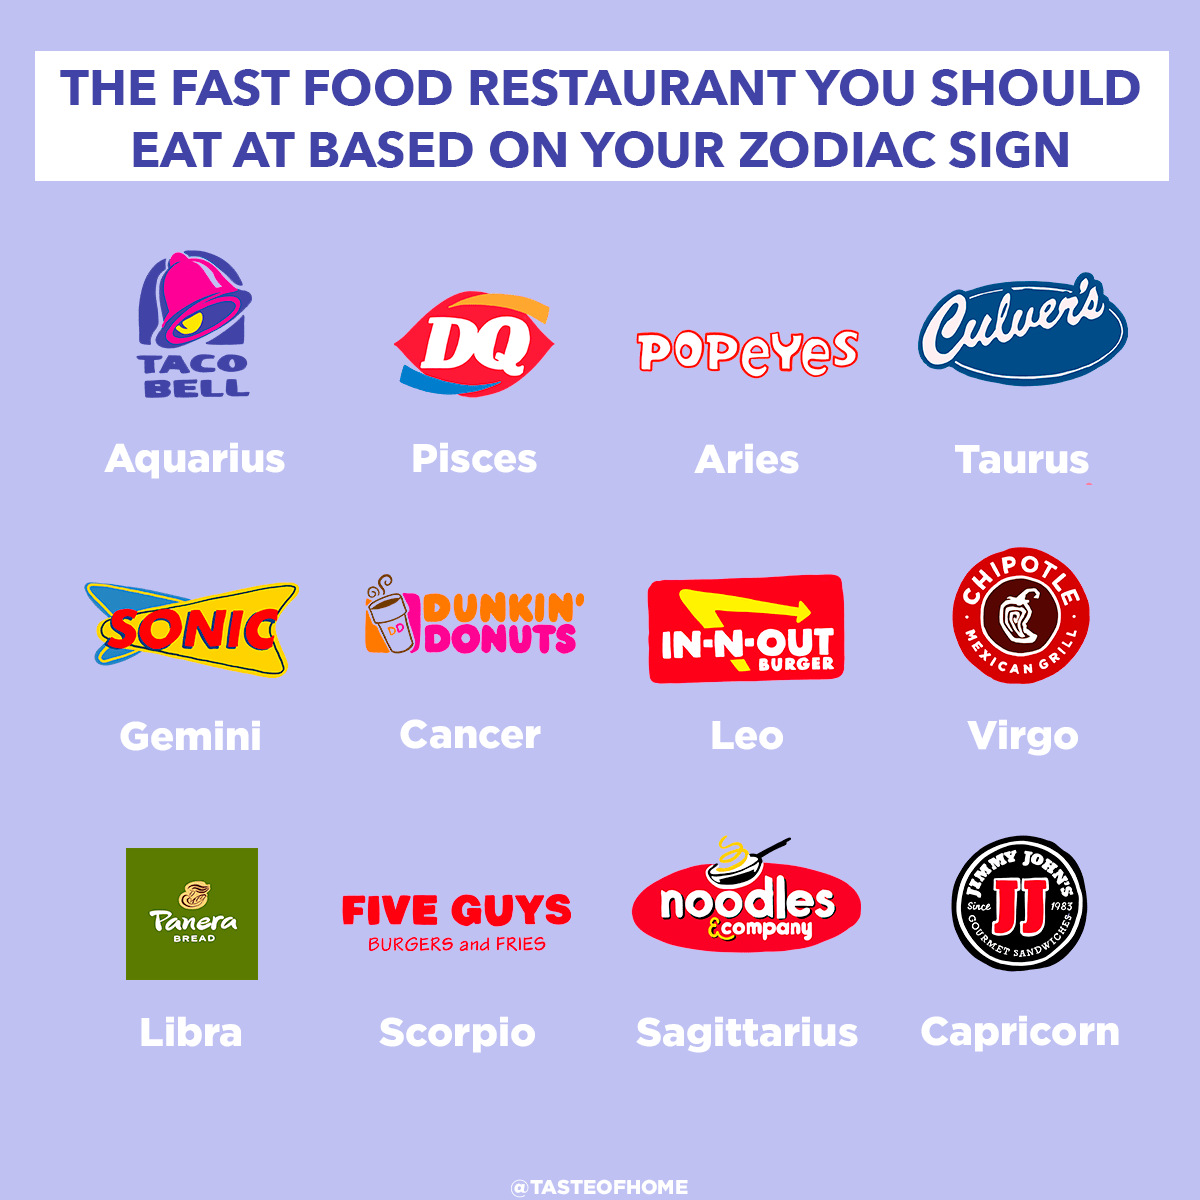 The Fast Food Restaurant For You Based On Your Zodiac Sign